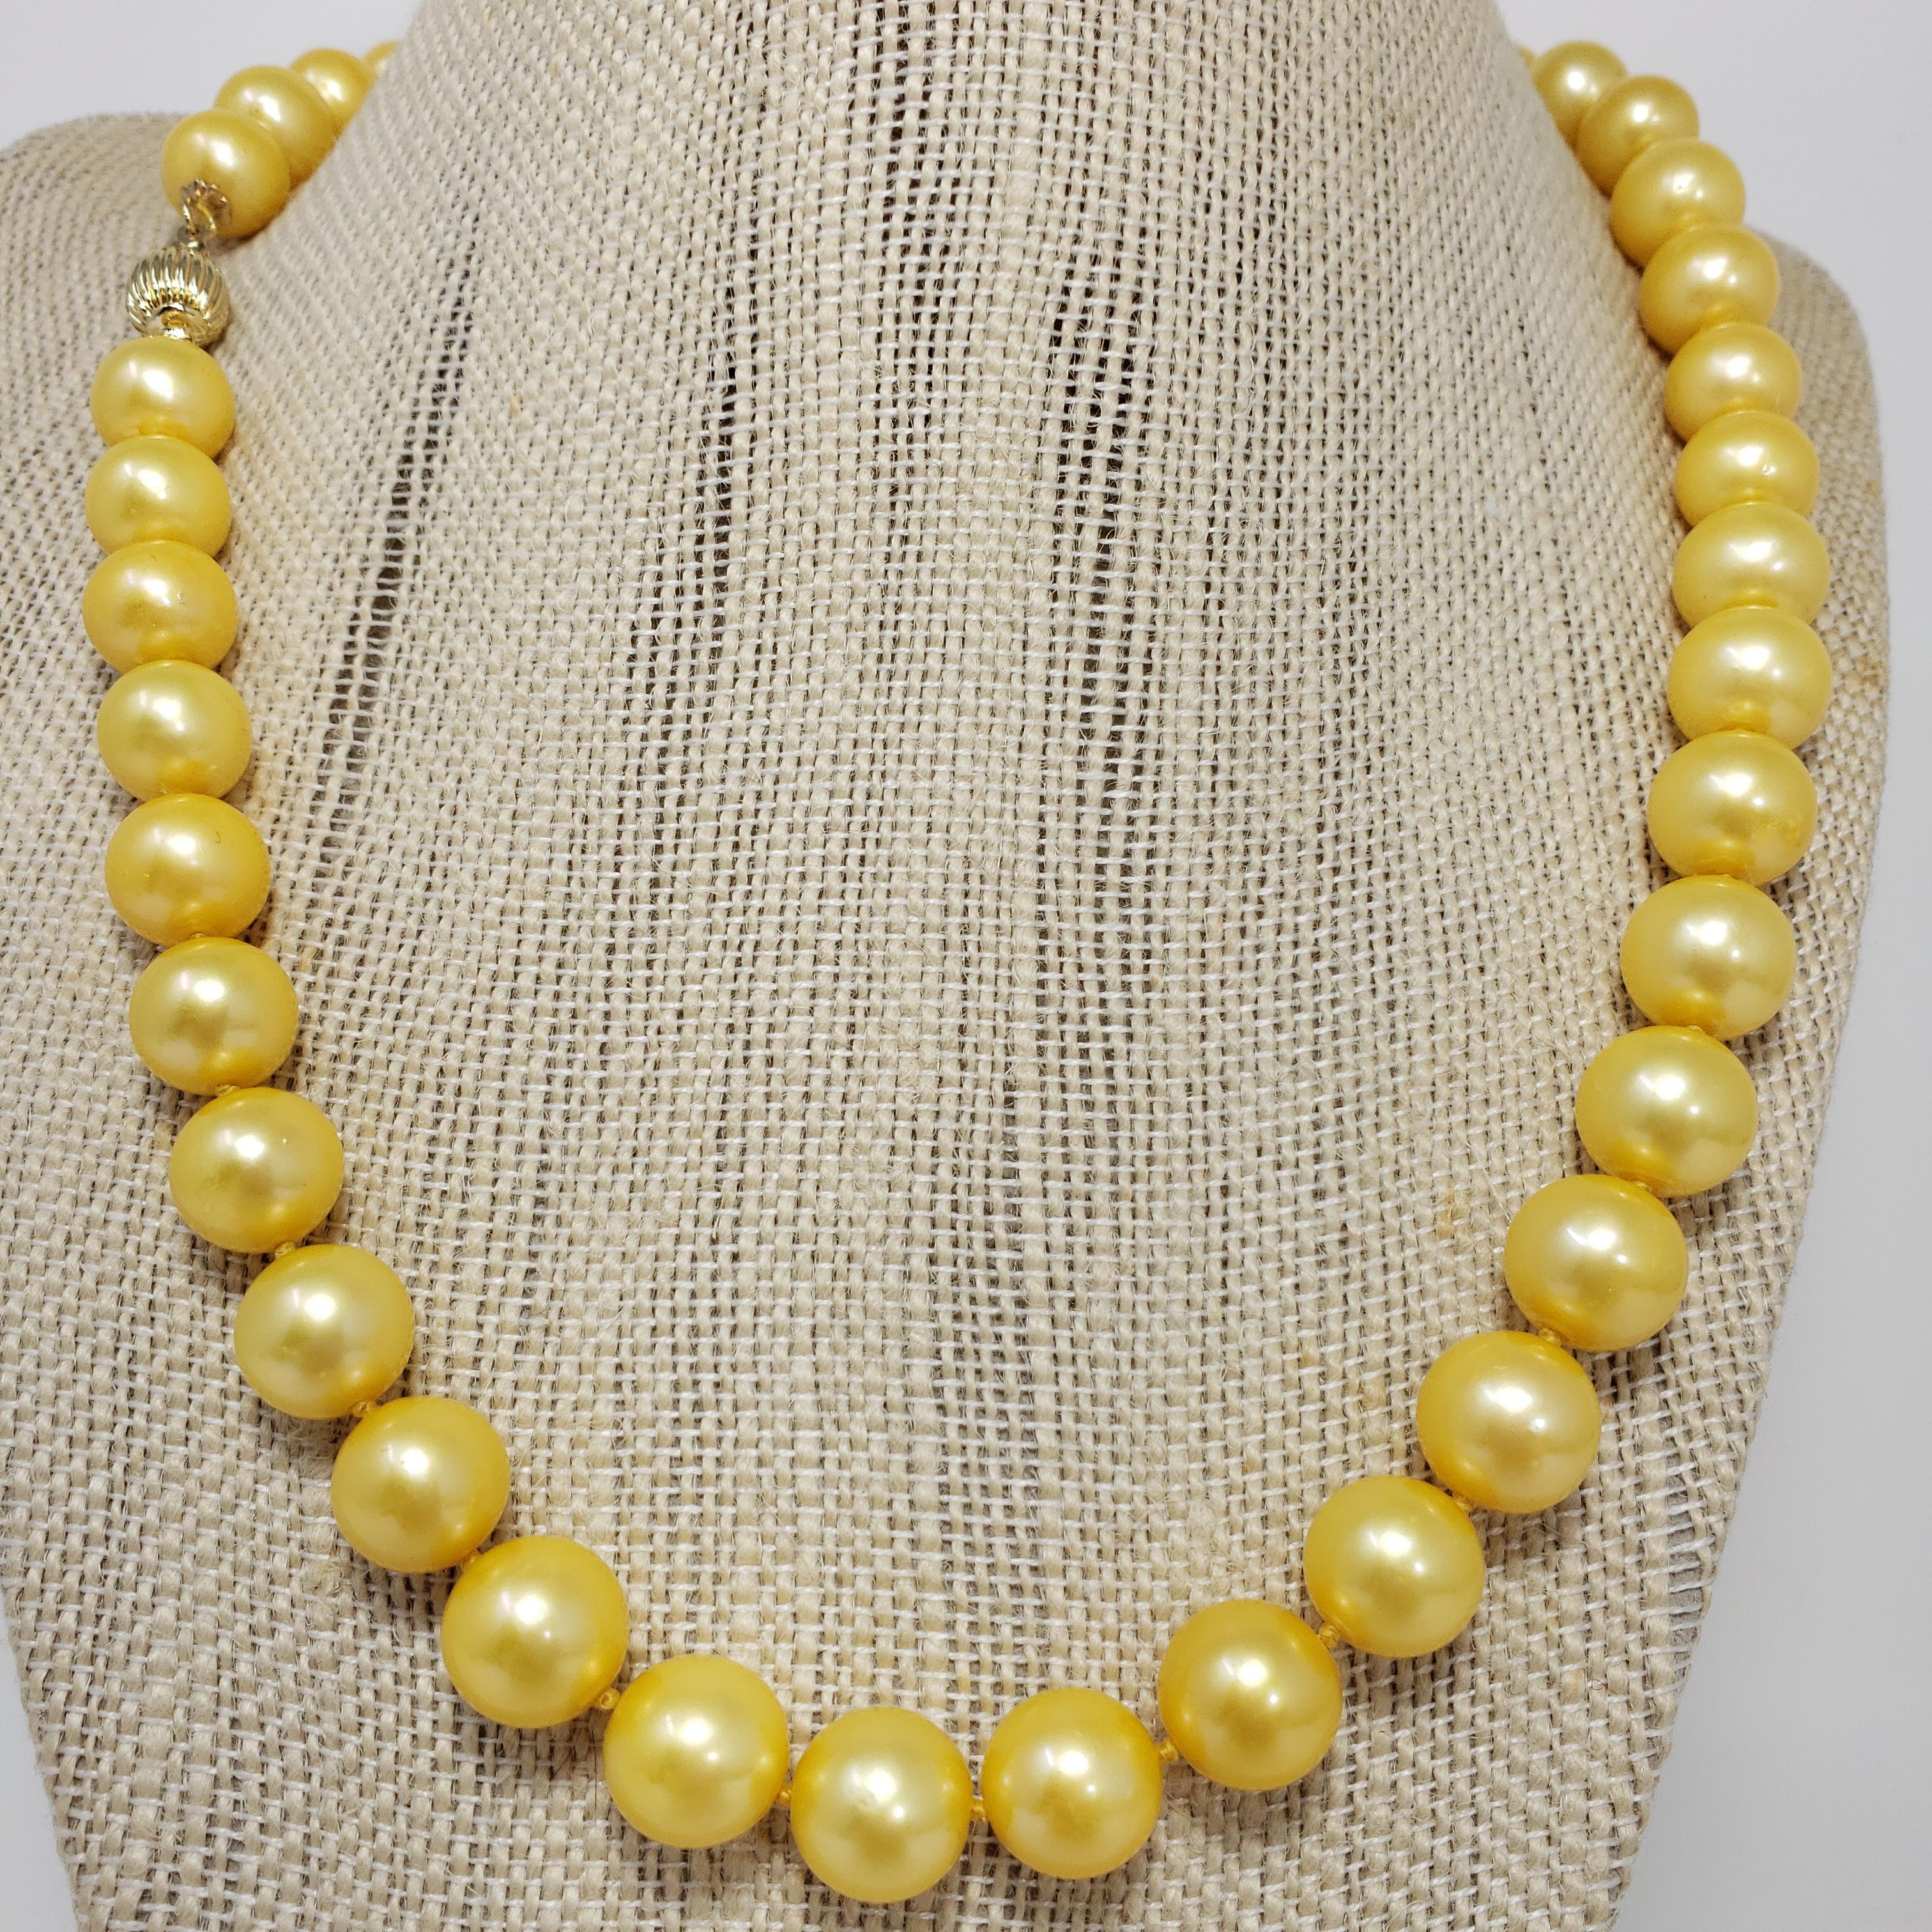 An exquisite necklace, featuring a single strand of South Sea pearls connected with a 14K yellow gold clasp. A golden glow perfect for any style!

Hallmarks: 14K
Pearls approx 11mm each